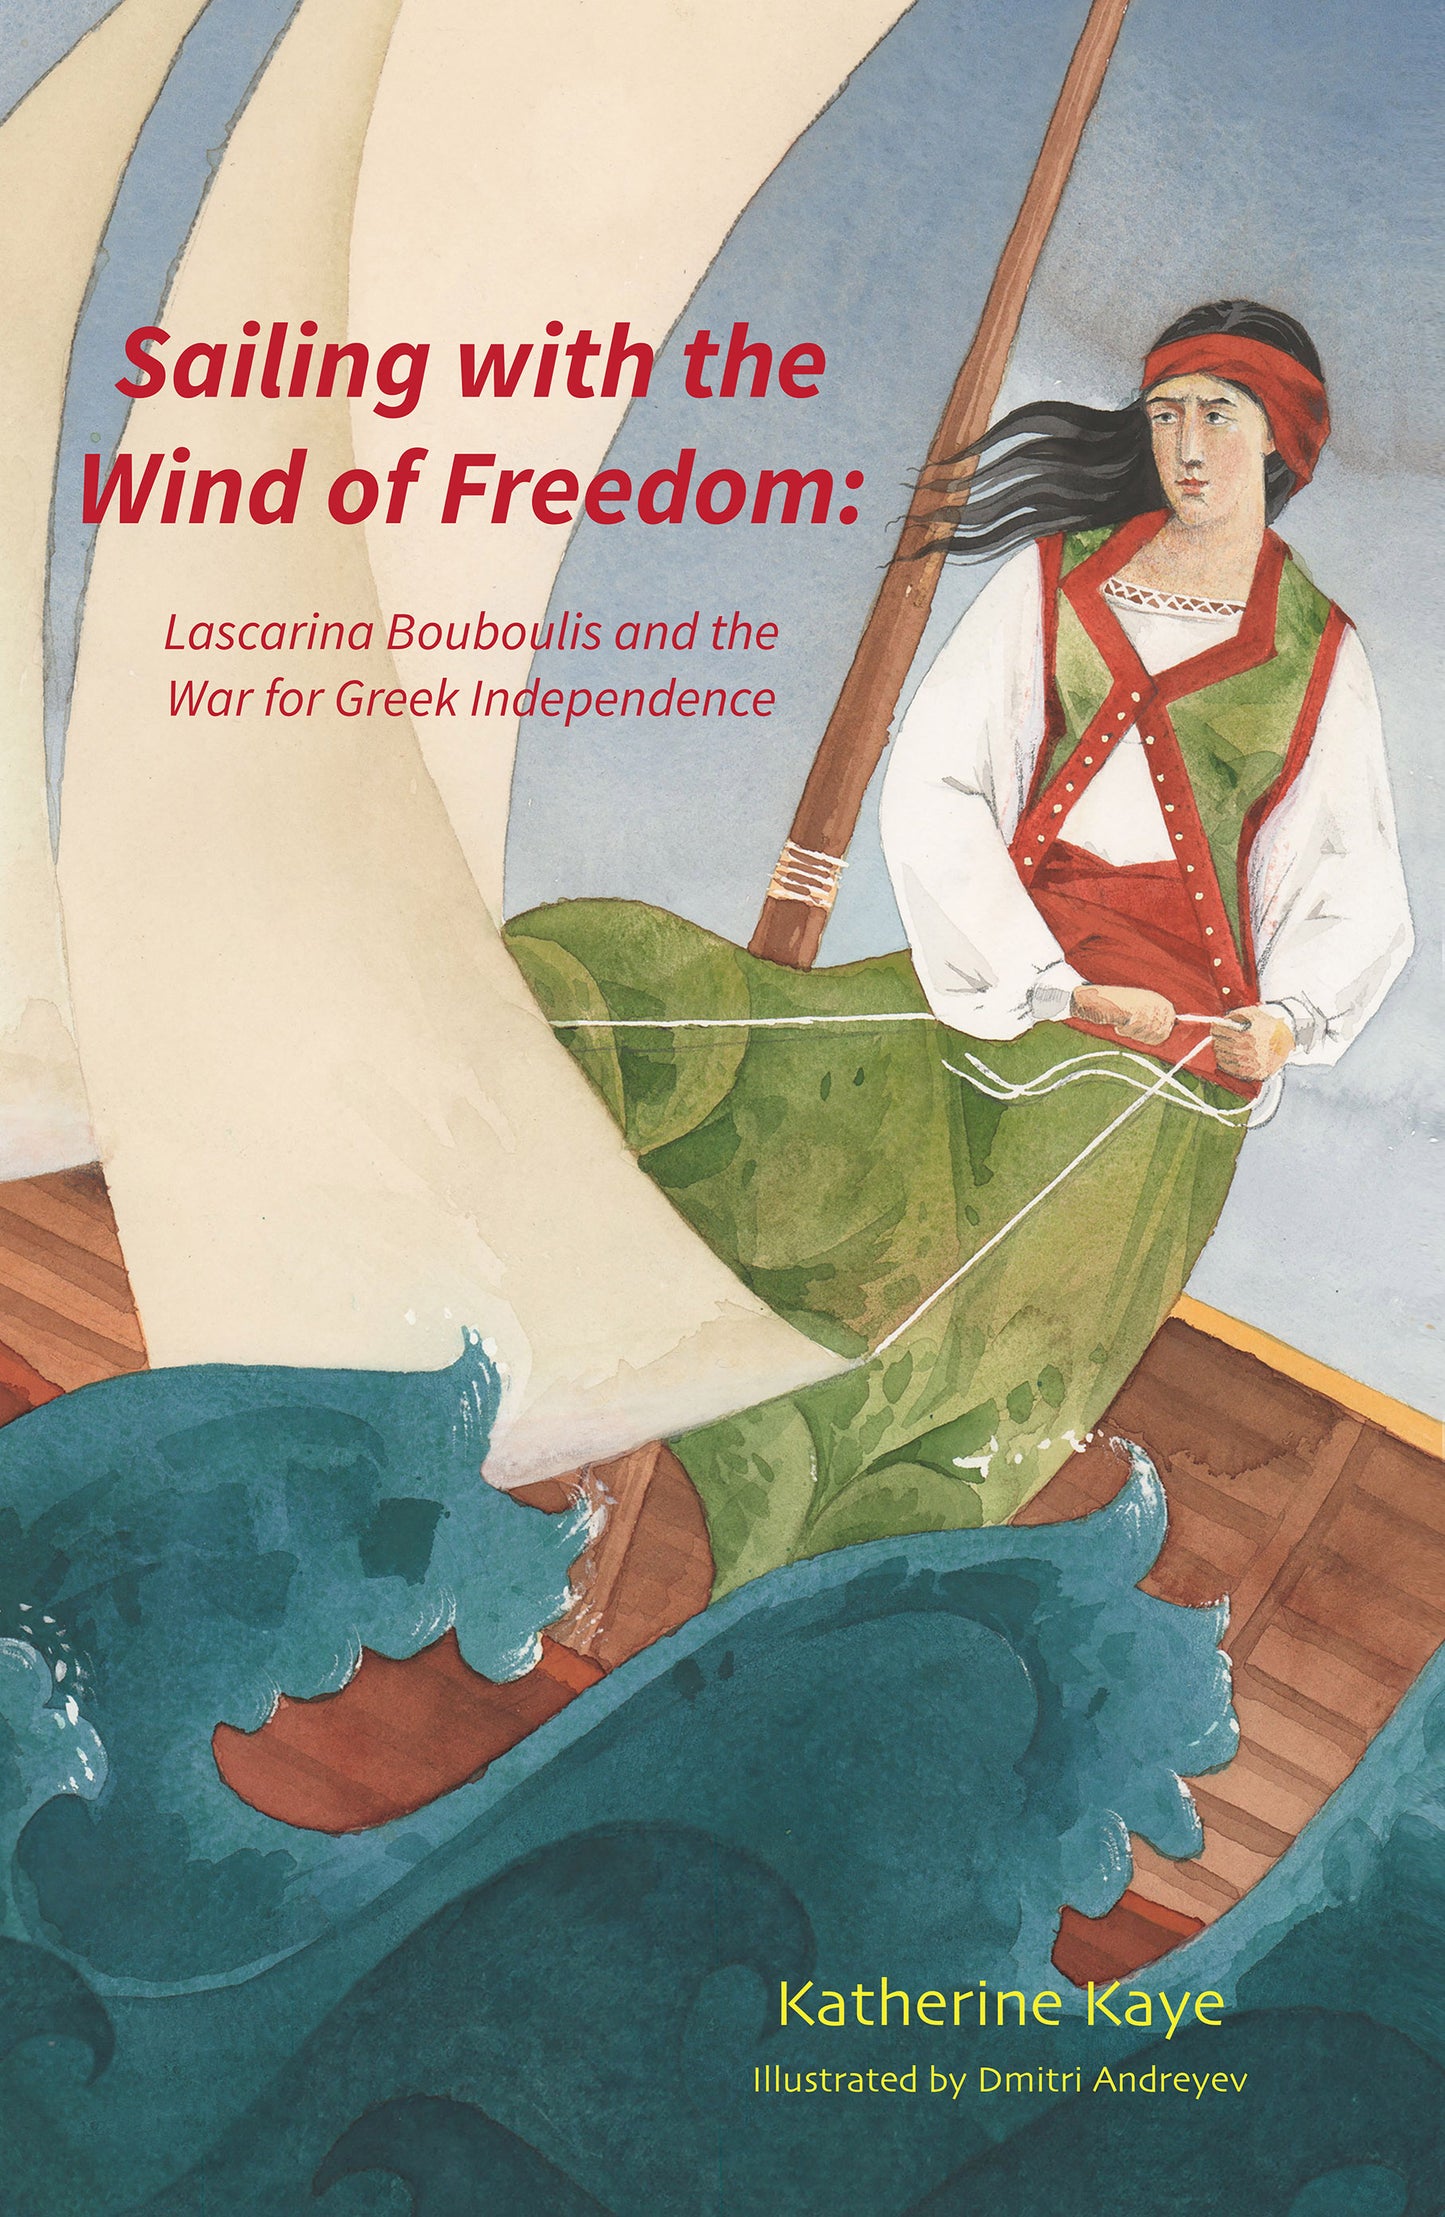 Sailing with the Wind of Freedom: Lascarina Bouboulis and the War for Greek Independence